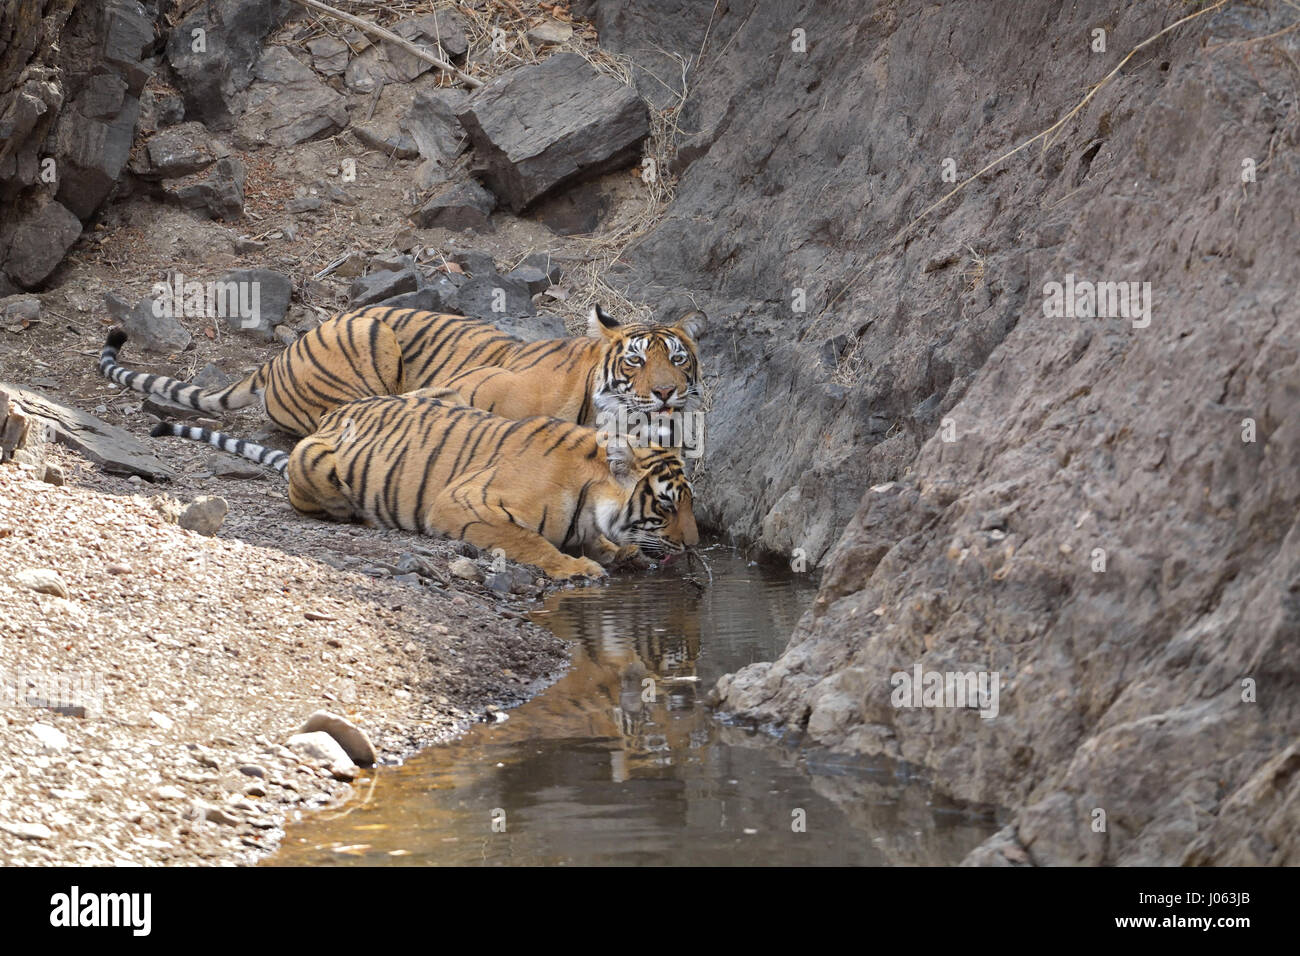 Two wild tigers, mother and one grown up cub, drinking from a water hole during the hot and dry summers in Ranthambhore tiger reserve, India. Stock Photo